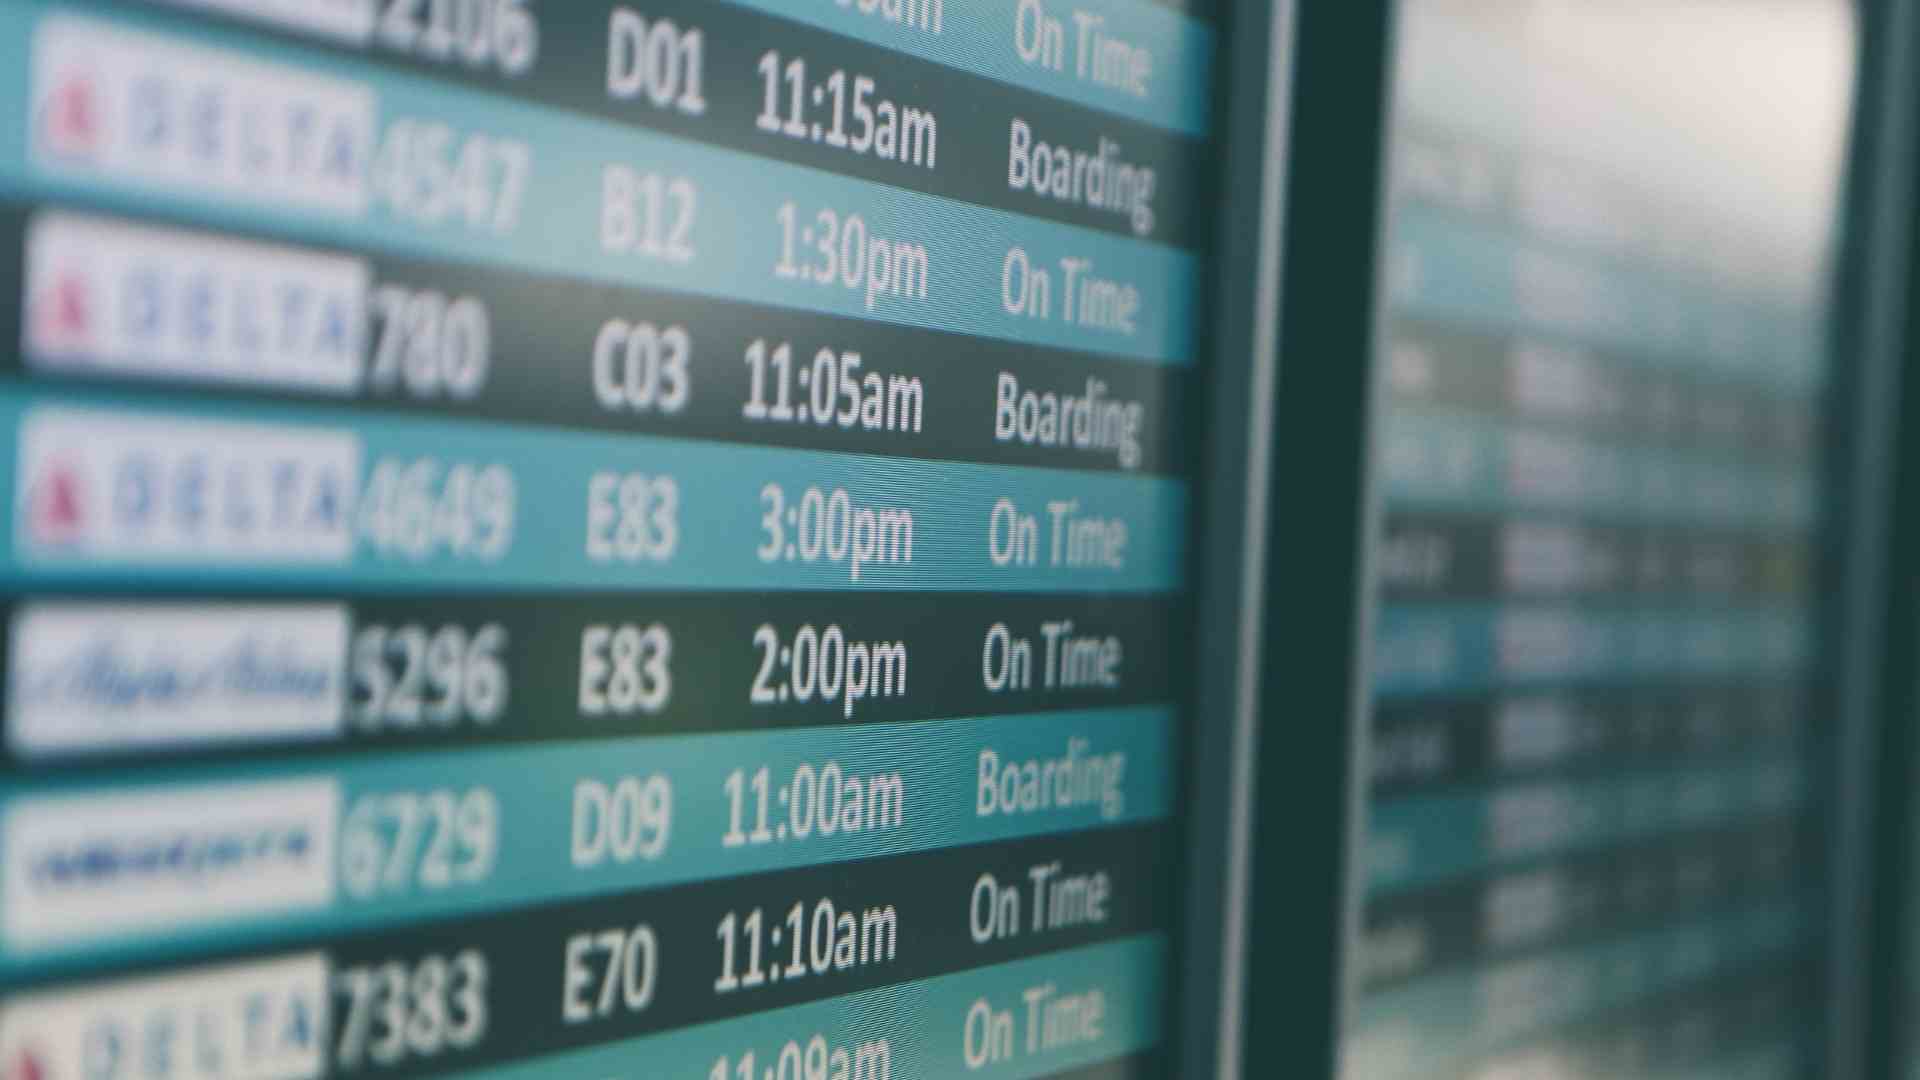 What Are Connecting Flights?